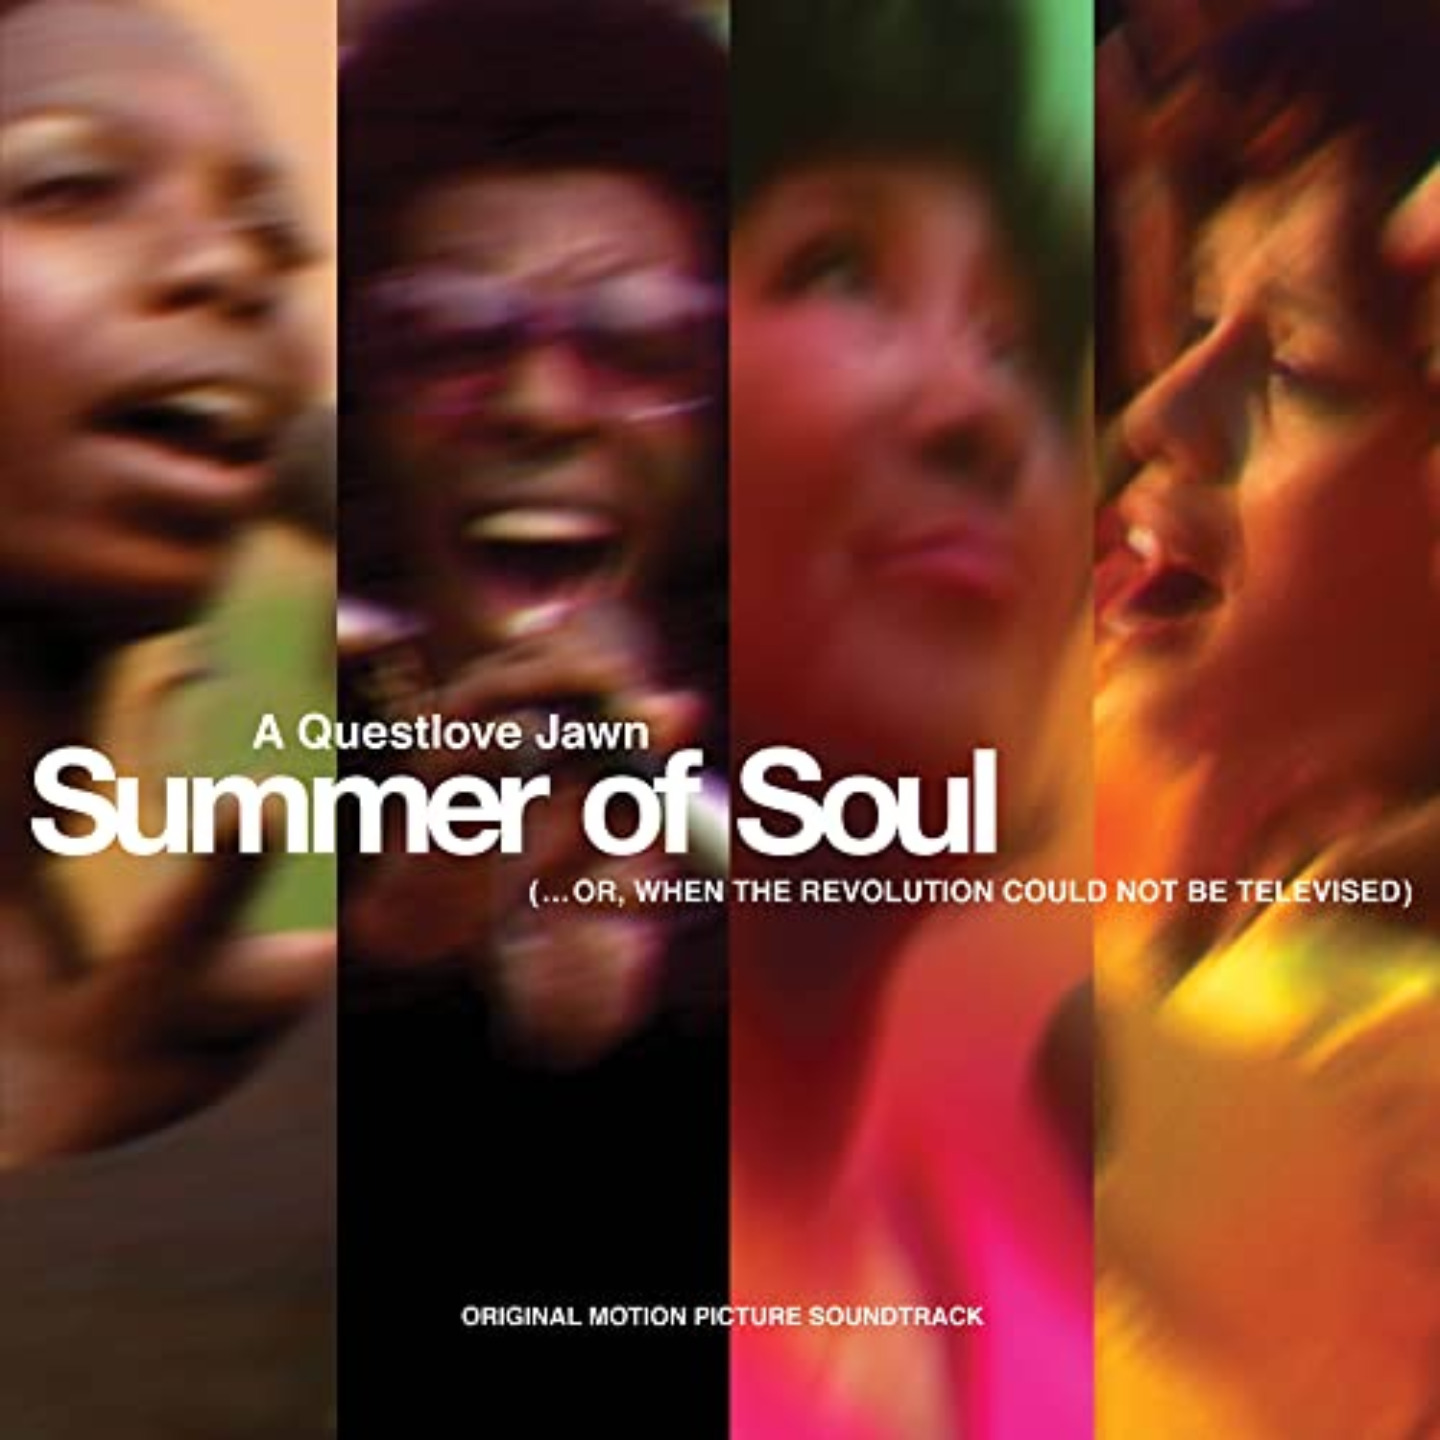 VA - Summer Of Soul Or, When The Revolution Could Not Be Televised Original Motion Picture Soundtrack 2xLP